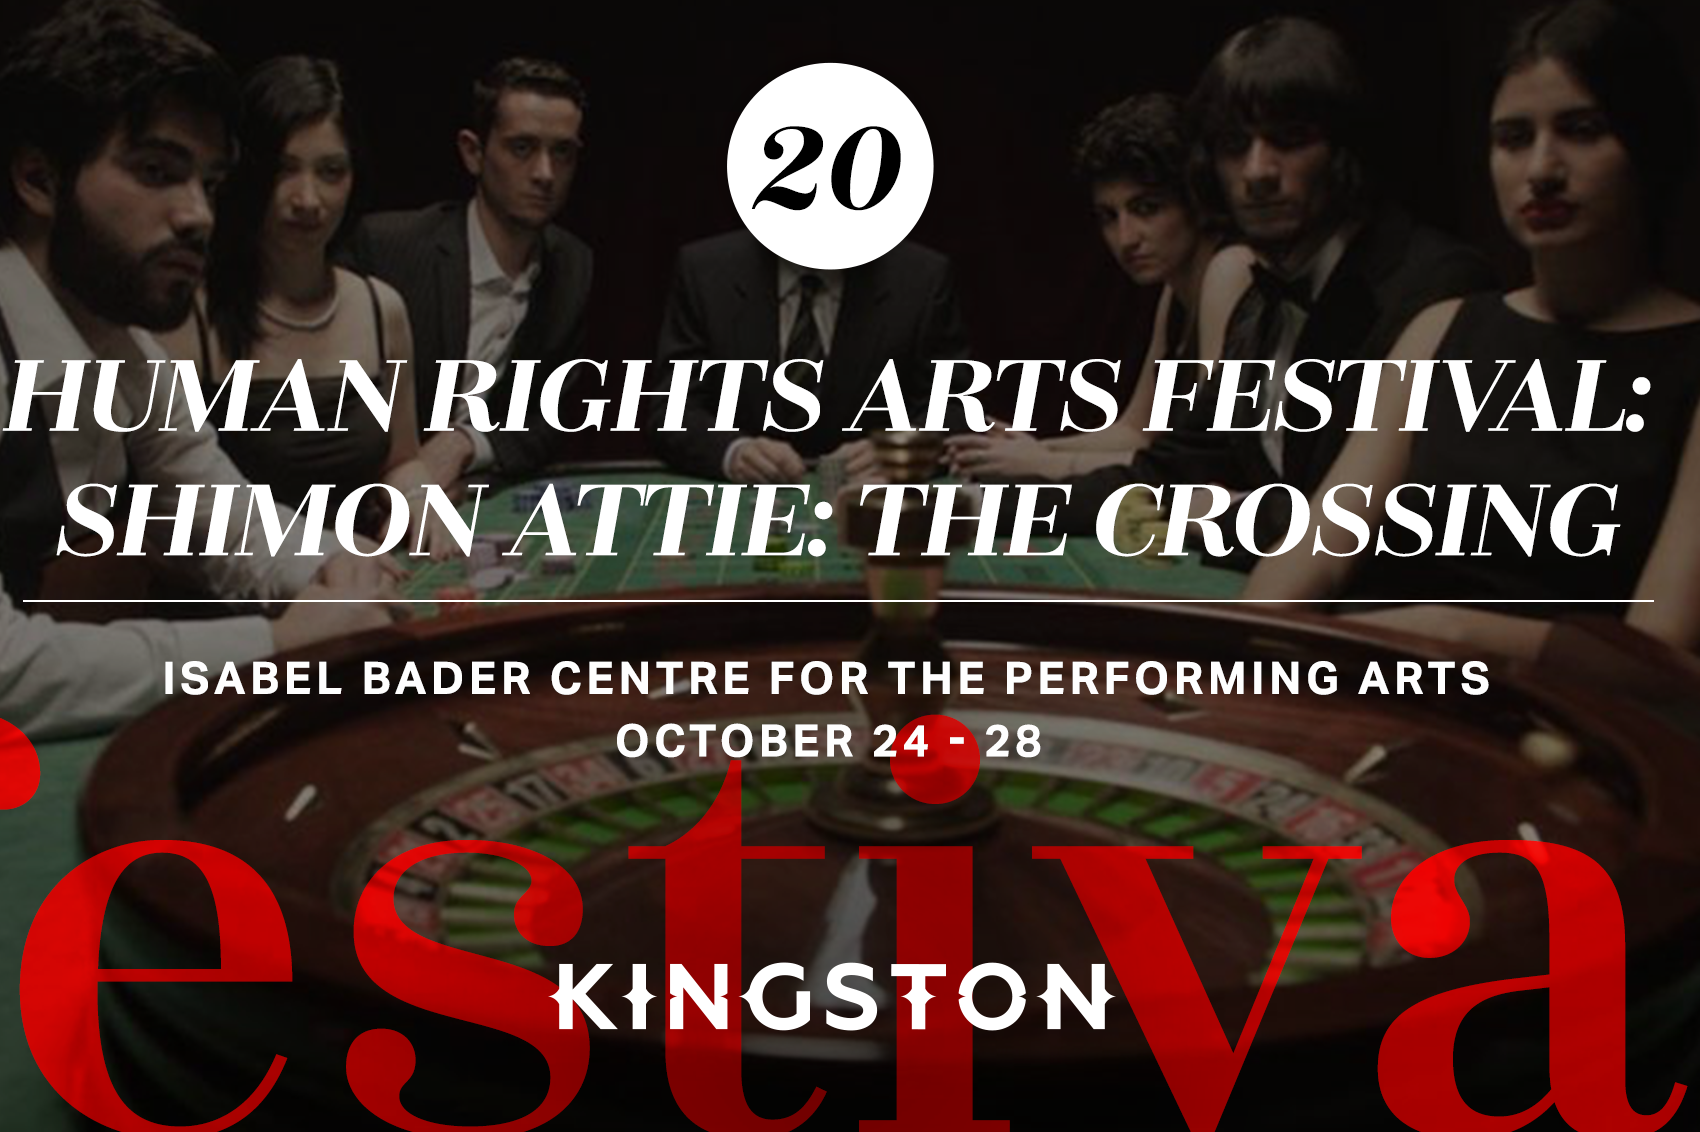 20. Human Rights Arts Festival: Shimon Attie: The Crossing: Isabel Bader Centre For The Performing Arts October 24-28